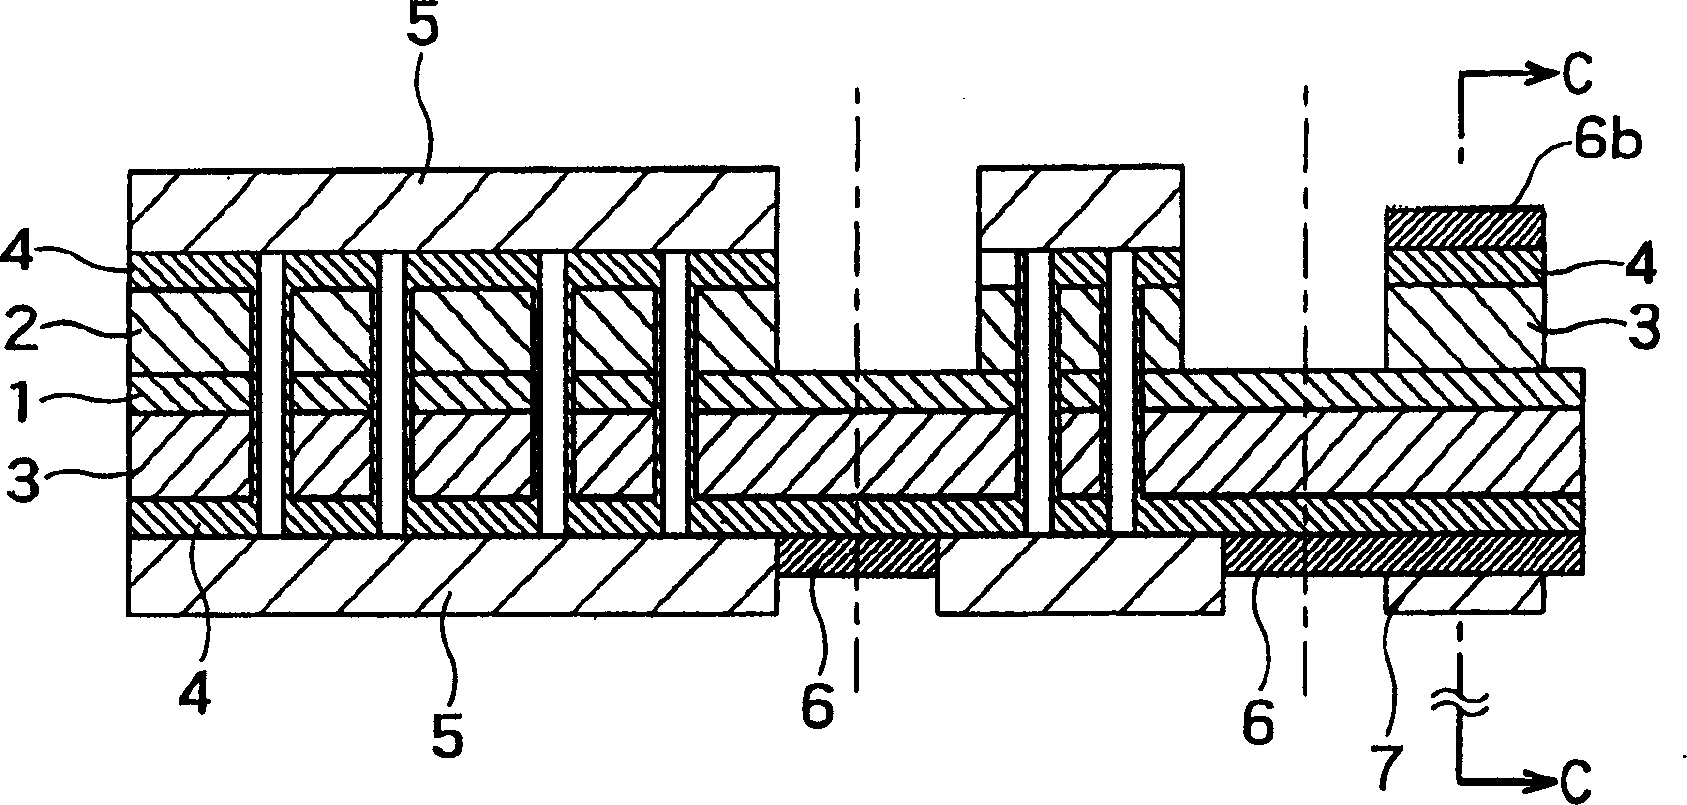 Flexible circuit substrate